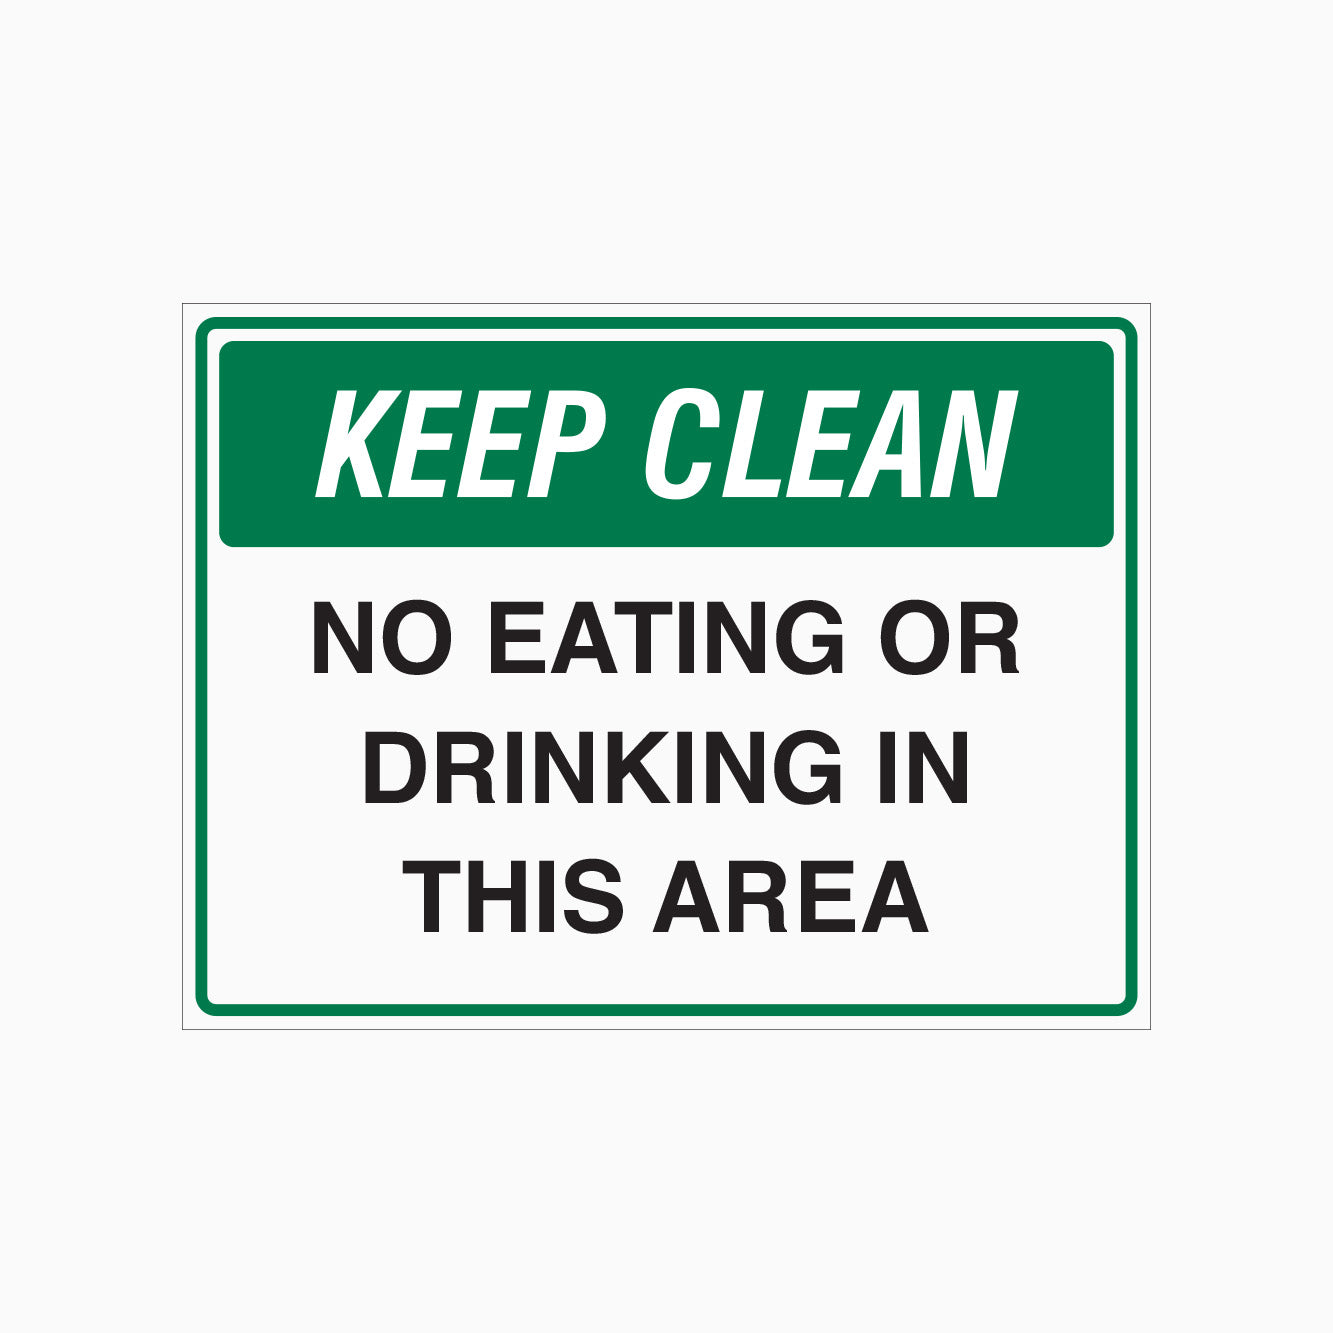 KEEP CLEAN - NO EATING OR DRINKING IN THIS AREA SIGN